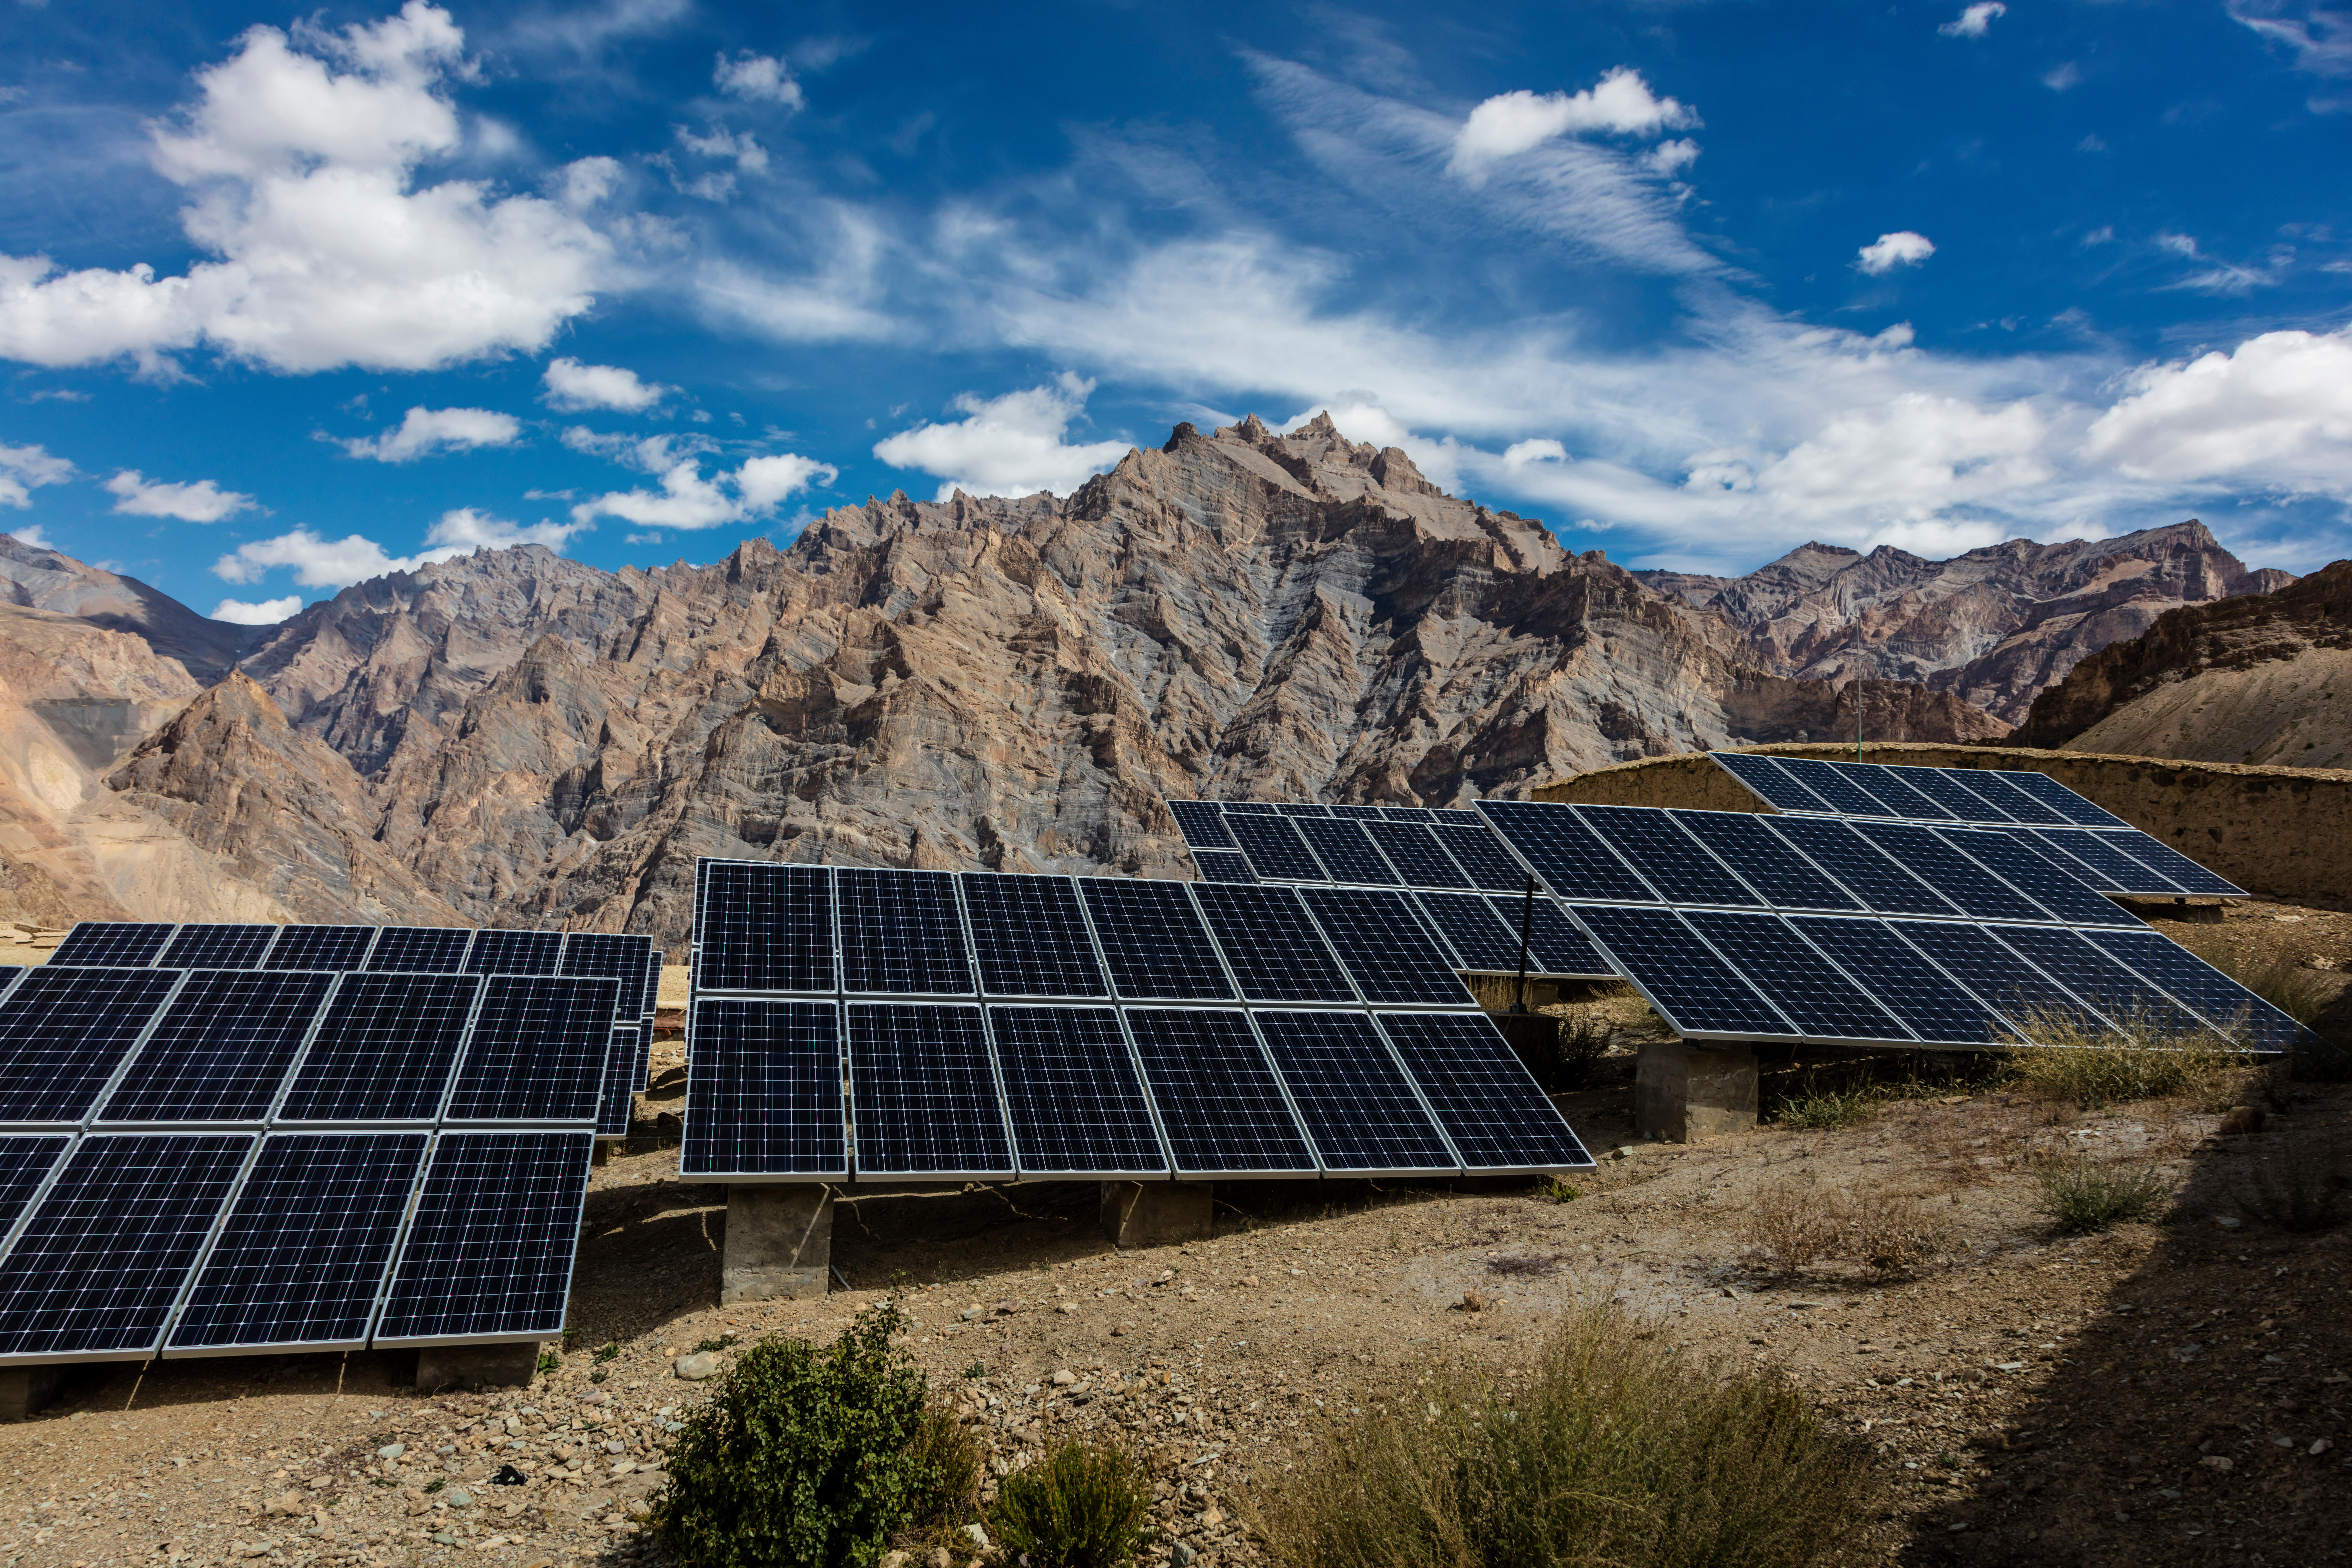 Solar panels in Ladakh, India. The GGI-OSOWOG initiative, announced by India in partnership with the UK at COP26, aims to overcome issues of intermittent renewable energy by connecting grids. (Image: Craig Lovell / Eagle Visions Photography / Alamy)